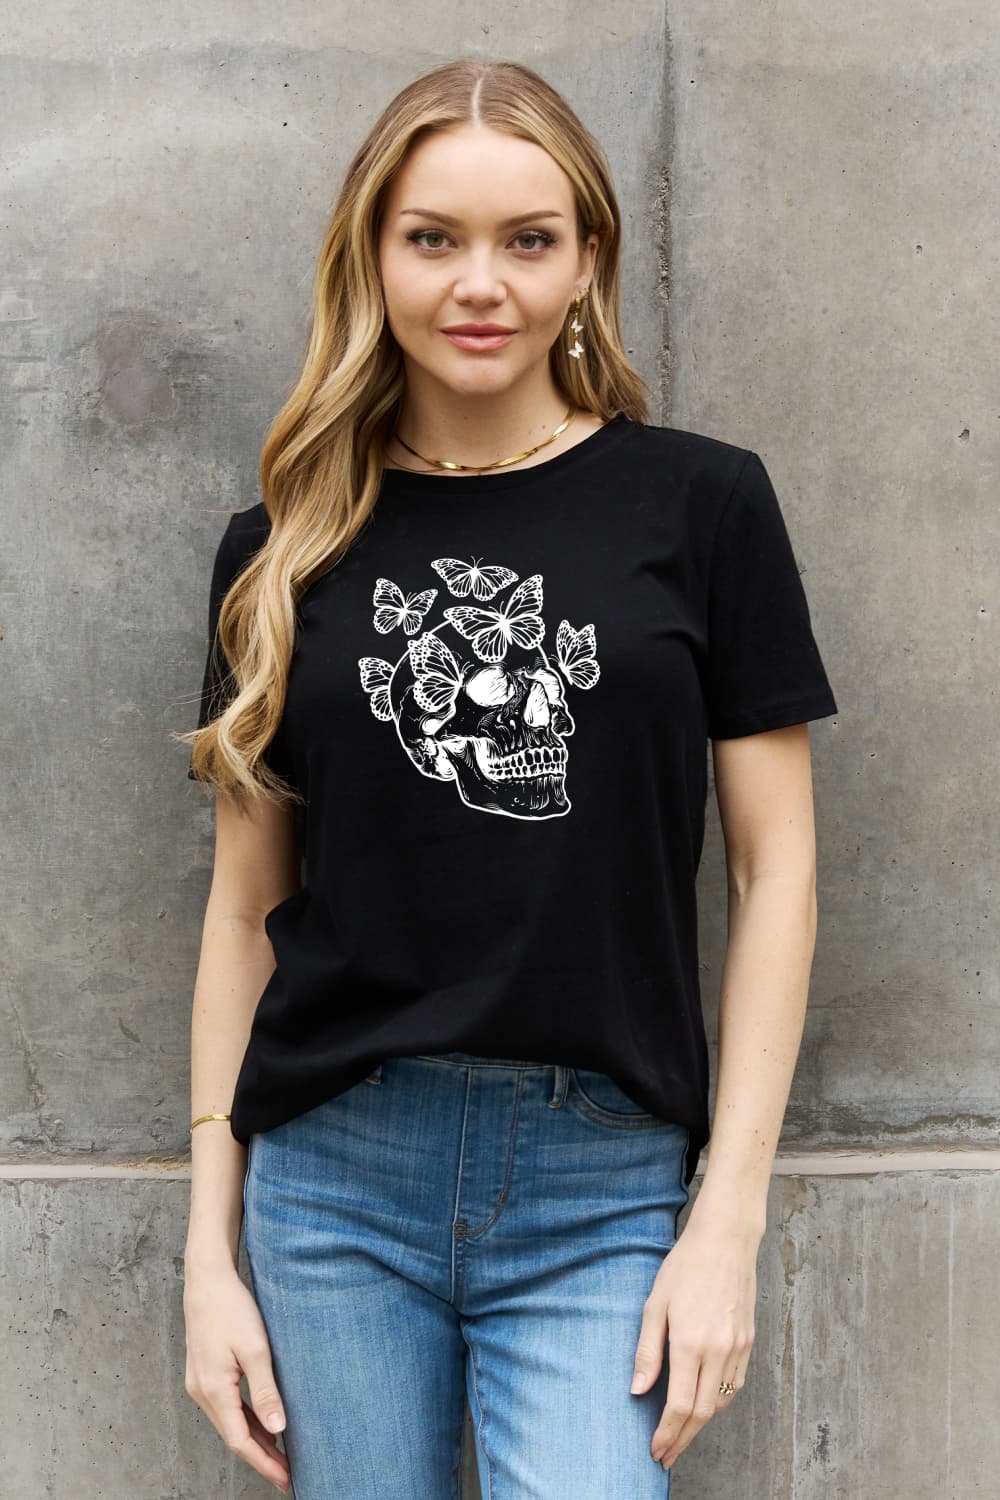 Skull Butterfly Contrasting Graphic 100% Cotton Short-sleeve Tee Shirt